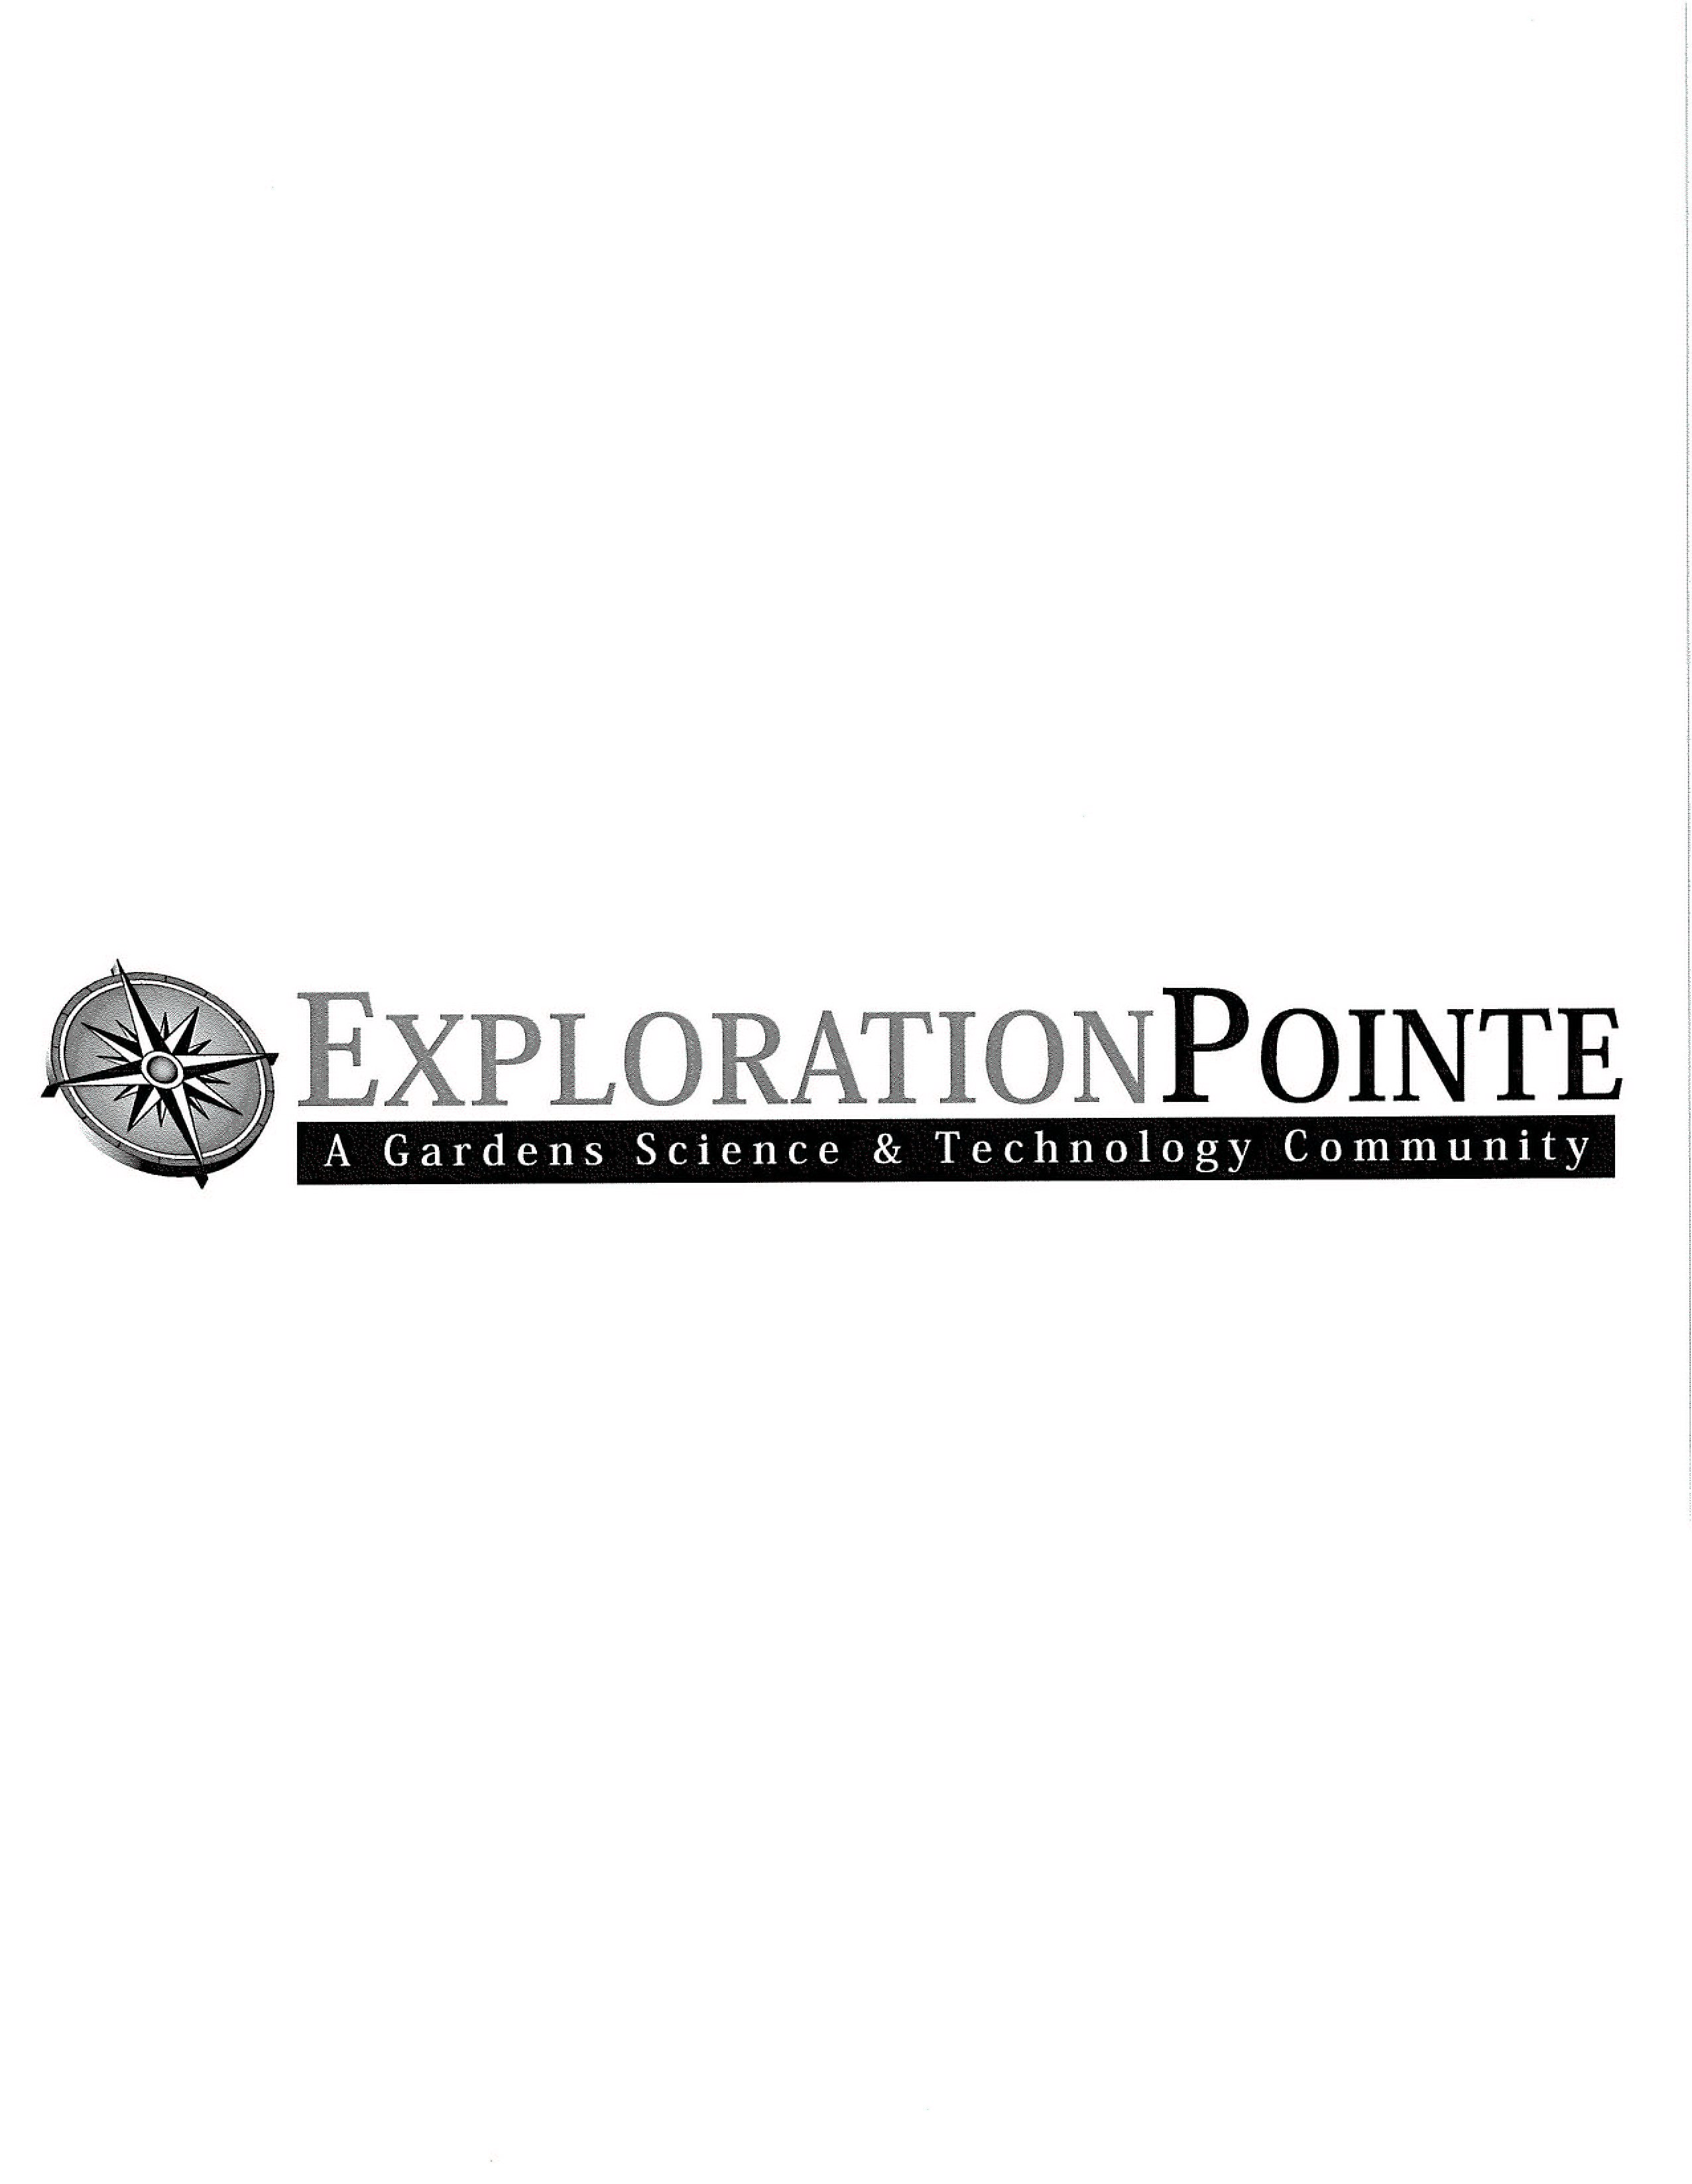  EXPLORATION POINTE A GARDENS SCIENCE &amp; TECHNOLOGY COMMUNITY